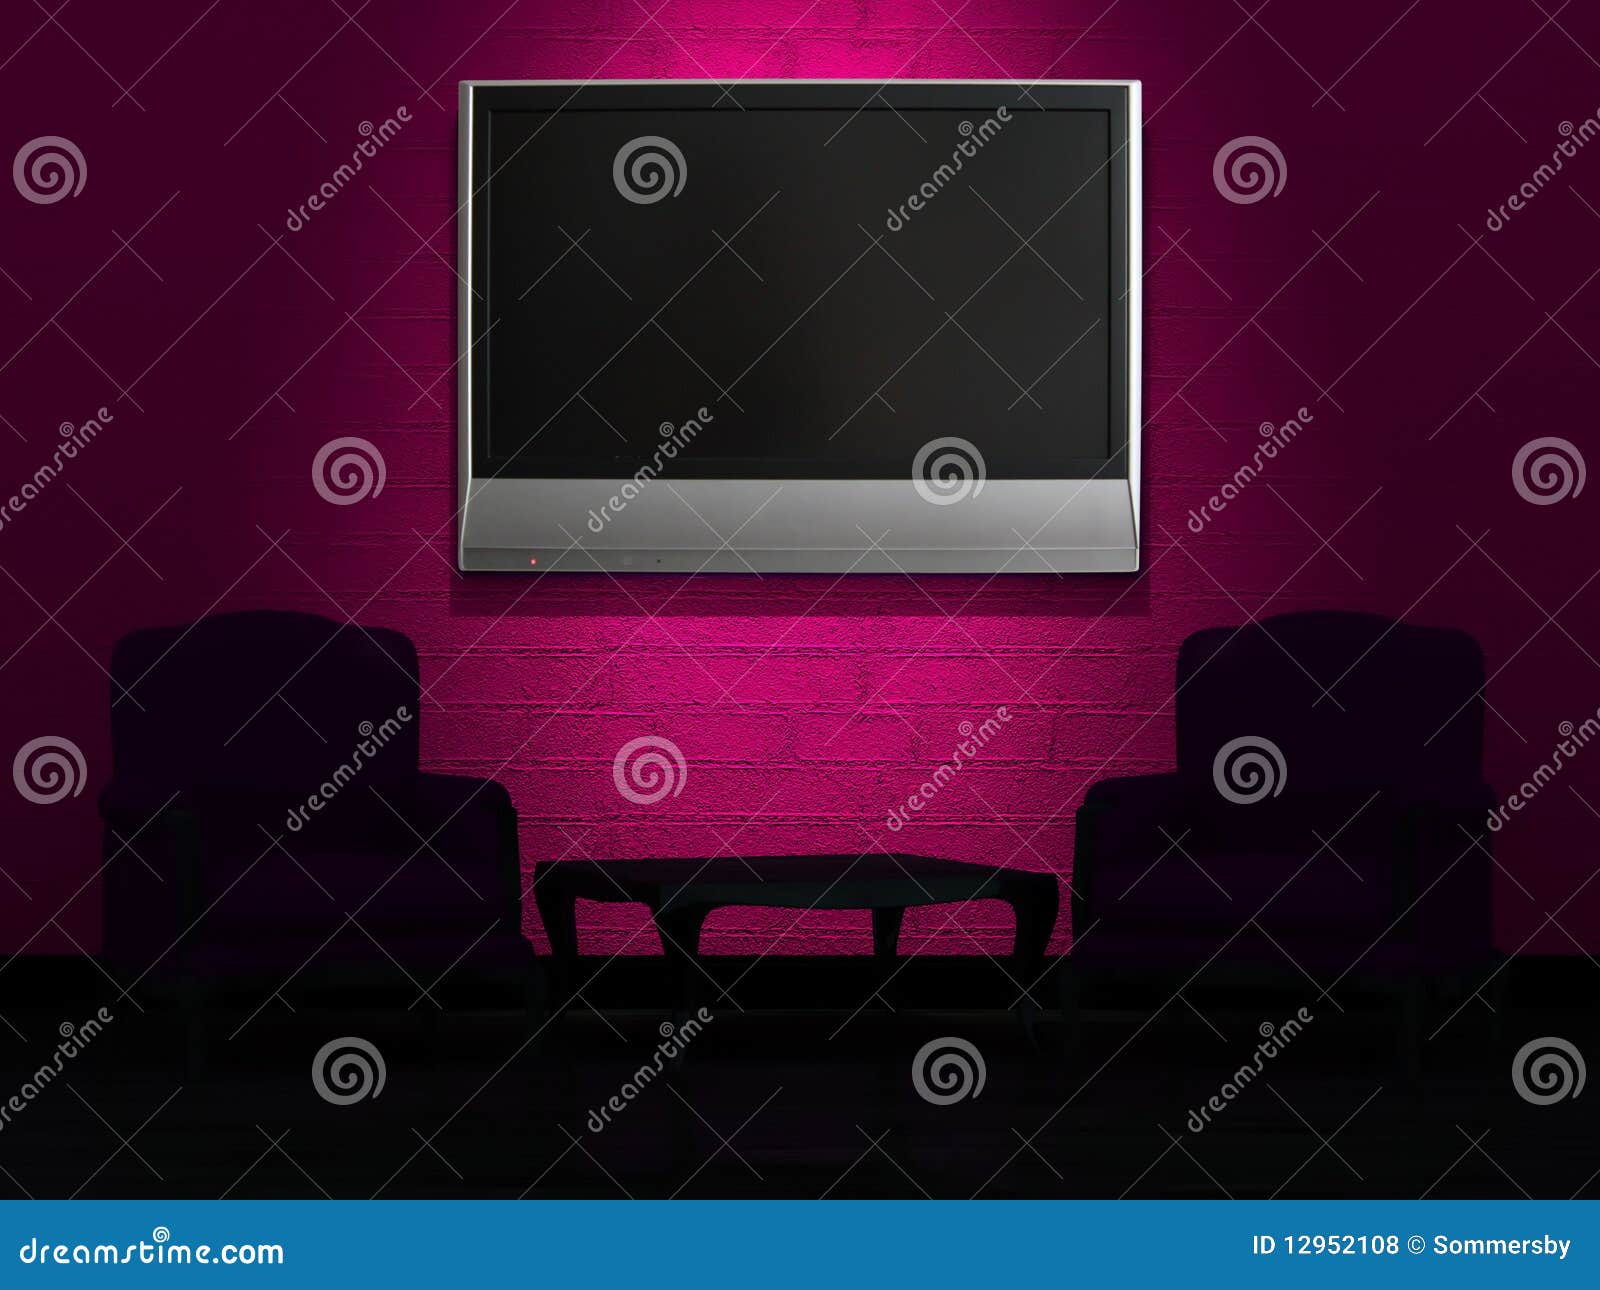  Free Stock Photos: Two chairs and wood table with LCD tv on the wall